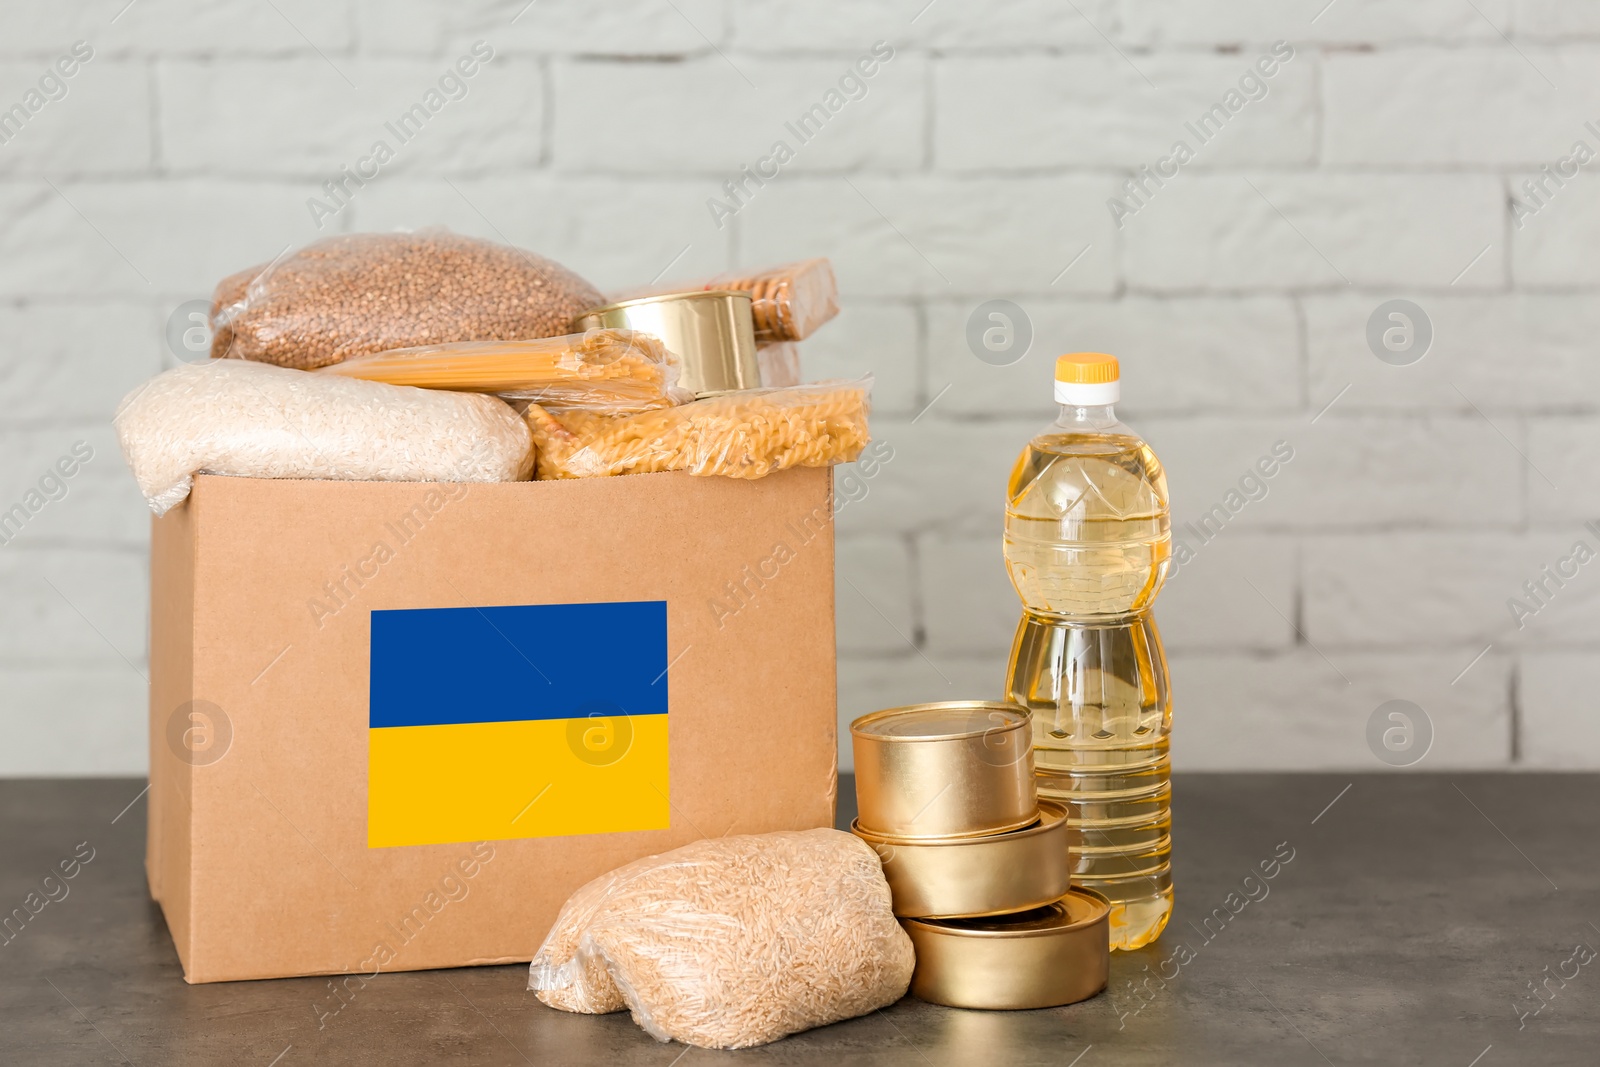 Image of Humanitarian aid for Ukrainian refugees. Donation box with food on table against brick wall